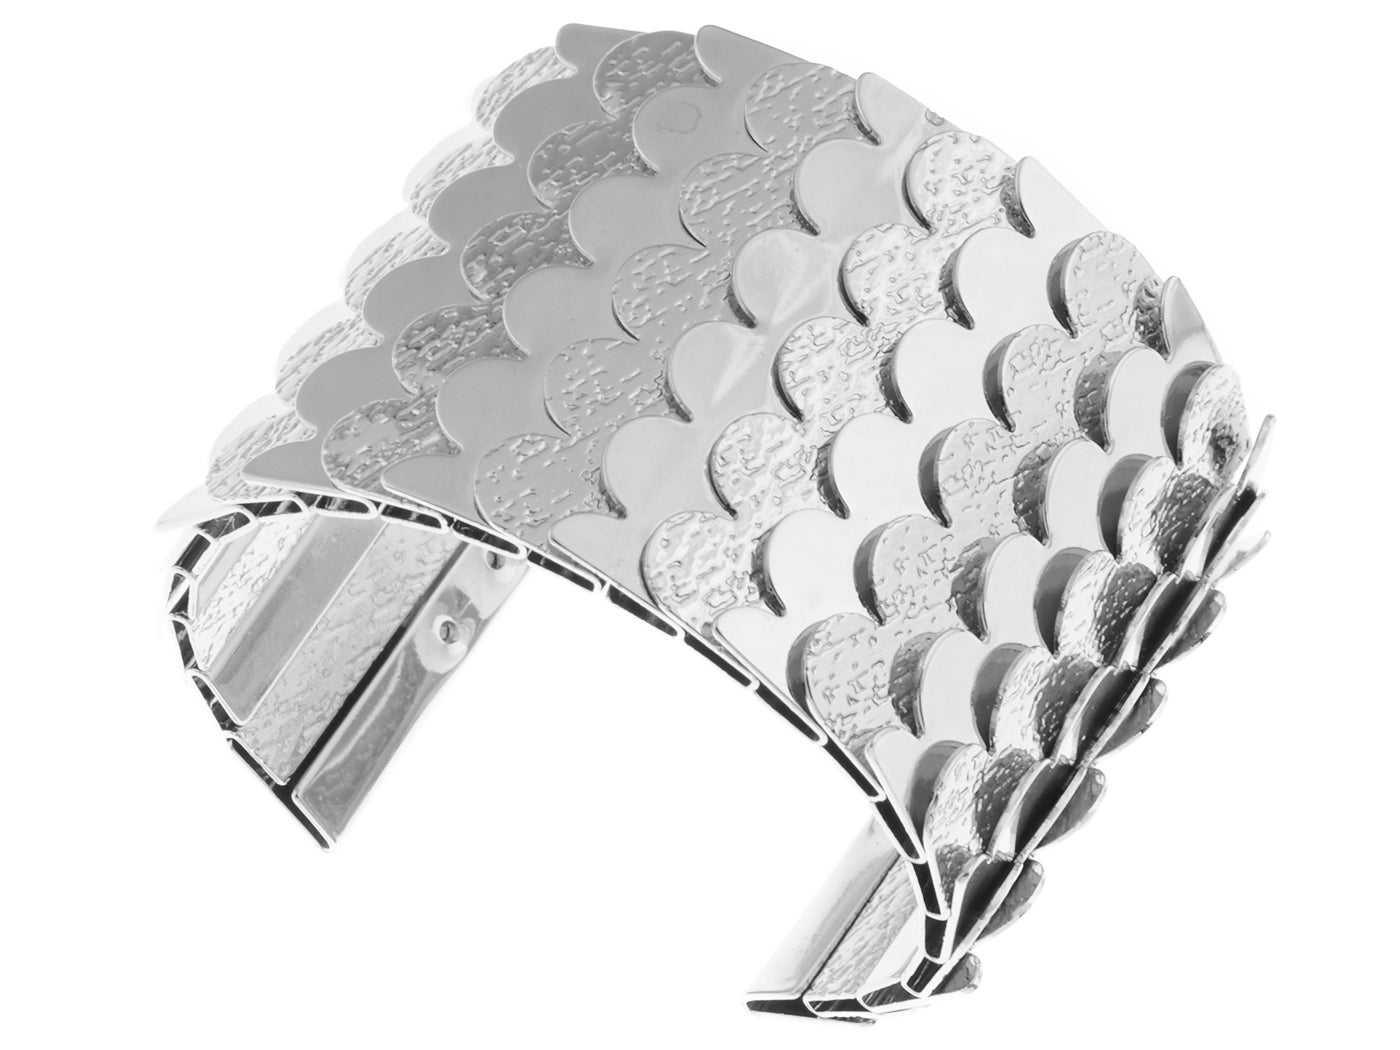 Egyptian Etched Textured Scales Scalloped Wrap Arm Cuff Bracelet